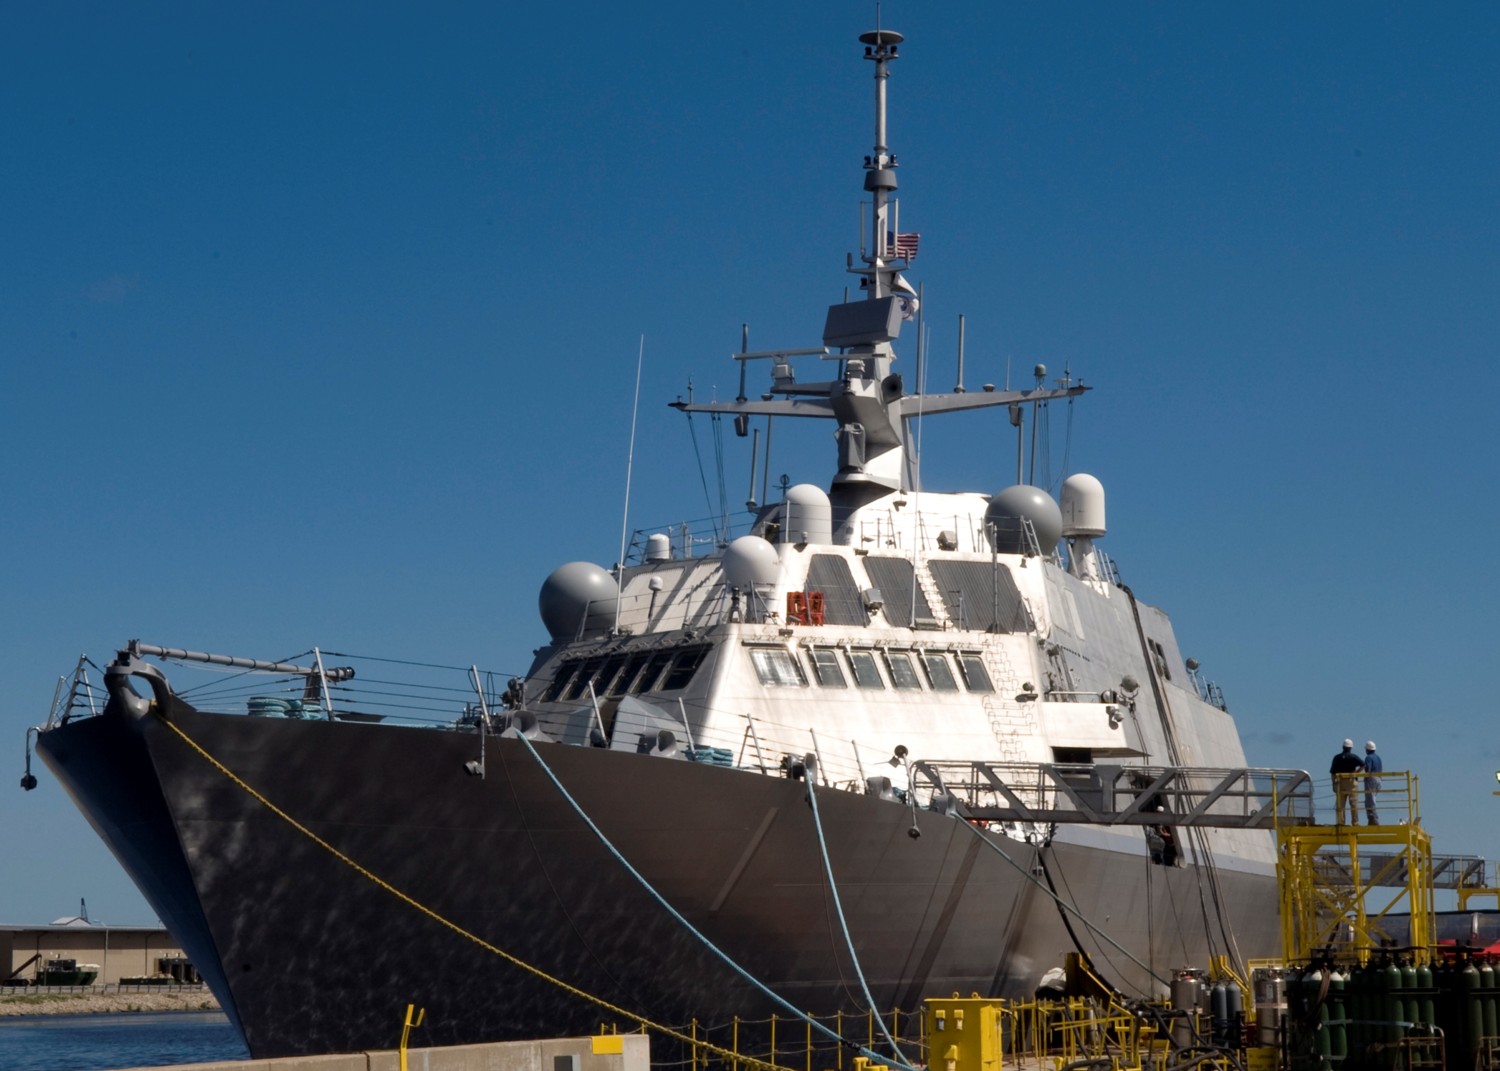 lcs-1 uss freedom class littoral combat ship us navy 124